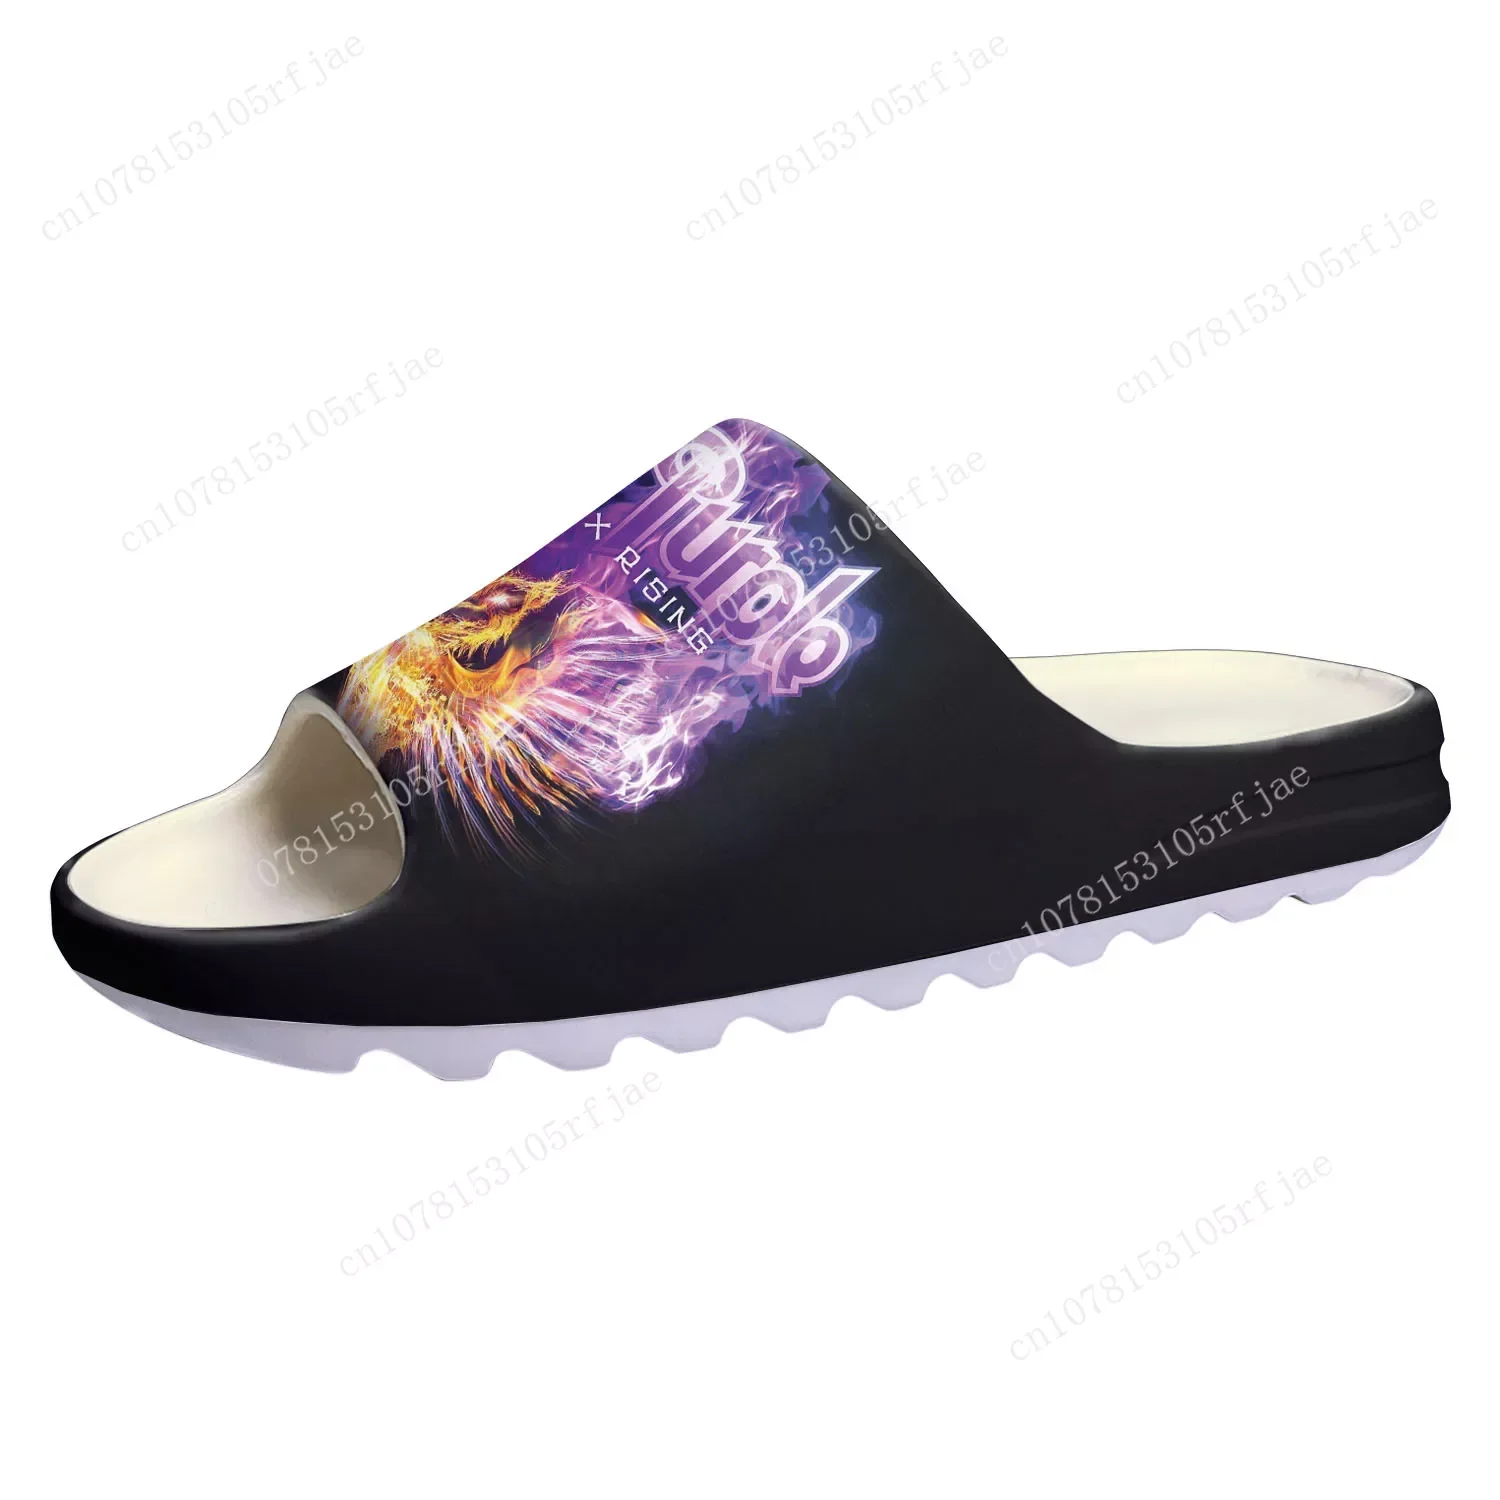 

Deep Purple Heavy Metal Rock Band Soft Sole Sllipers Home Clogs Water Shoes Mens Womens Teenager Beach Customize on Shit Sandals